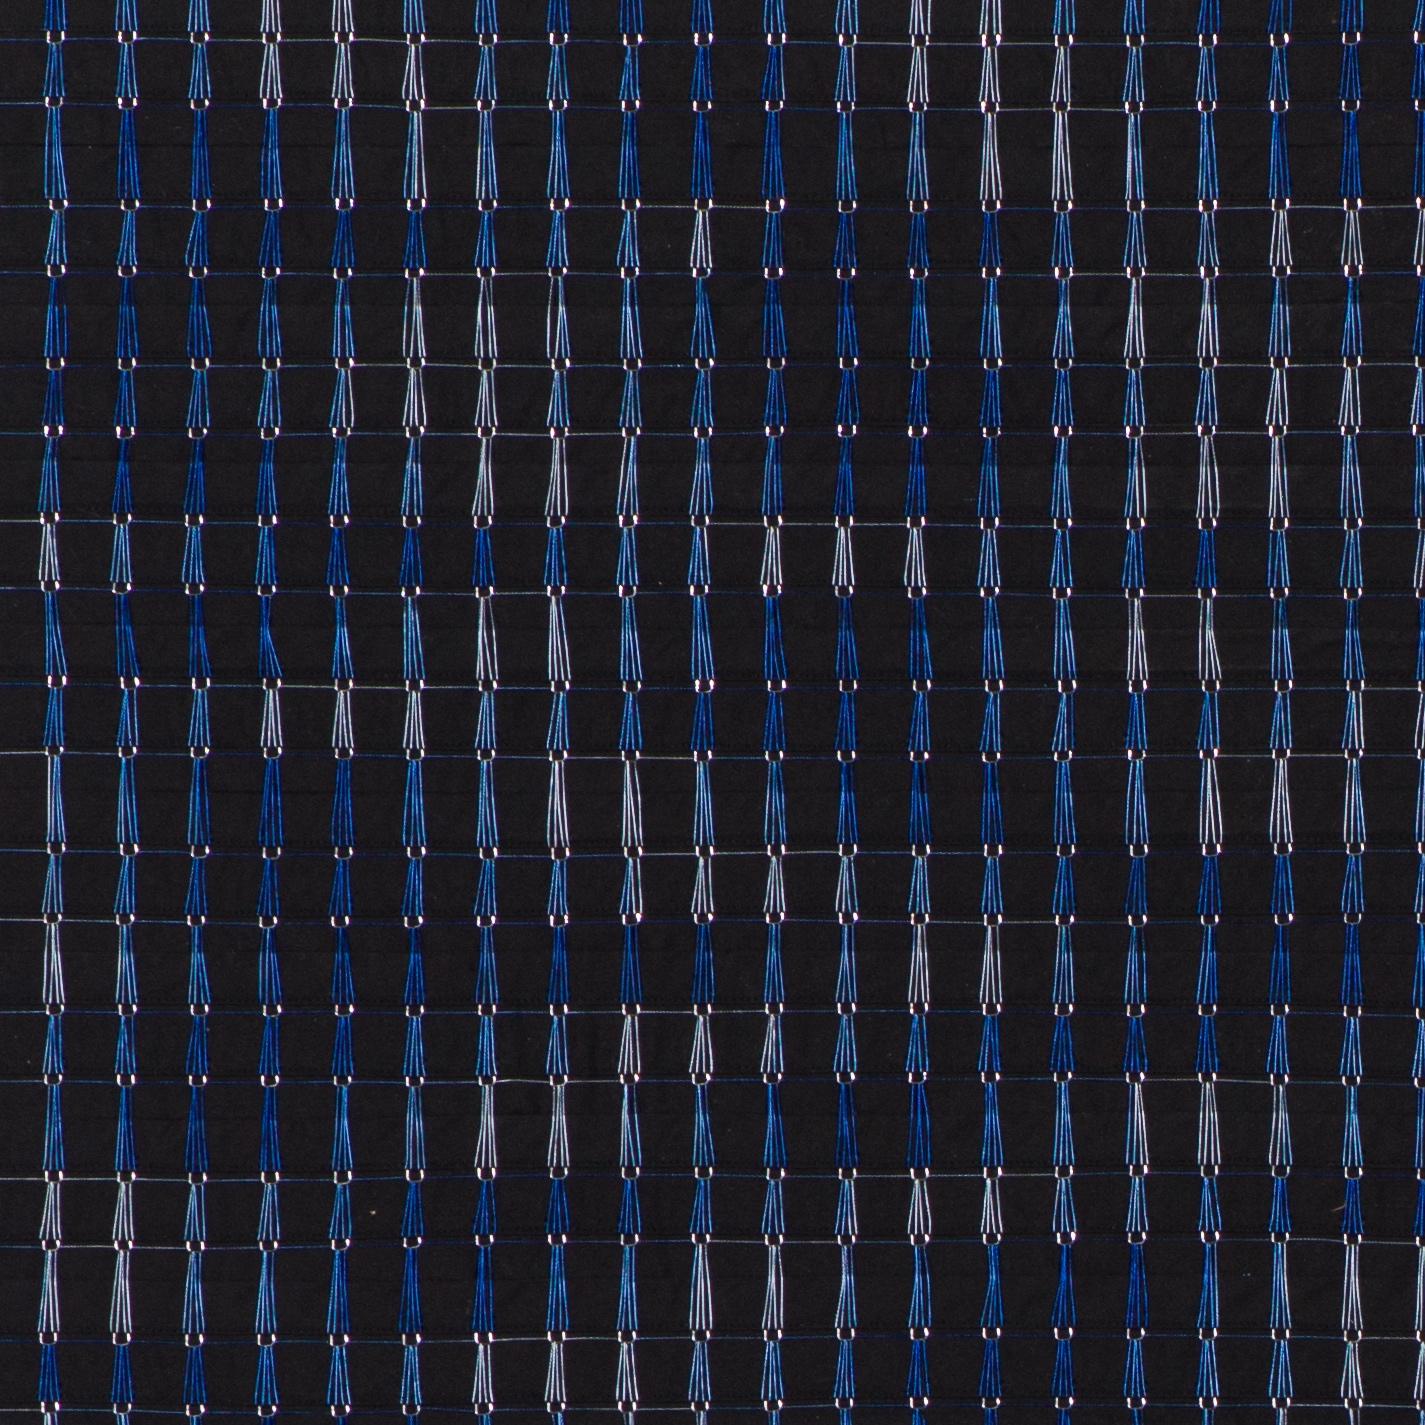 Black and Blue Field - Contemporary Art by Denise Yaghmourian